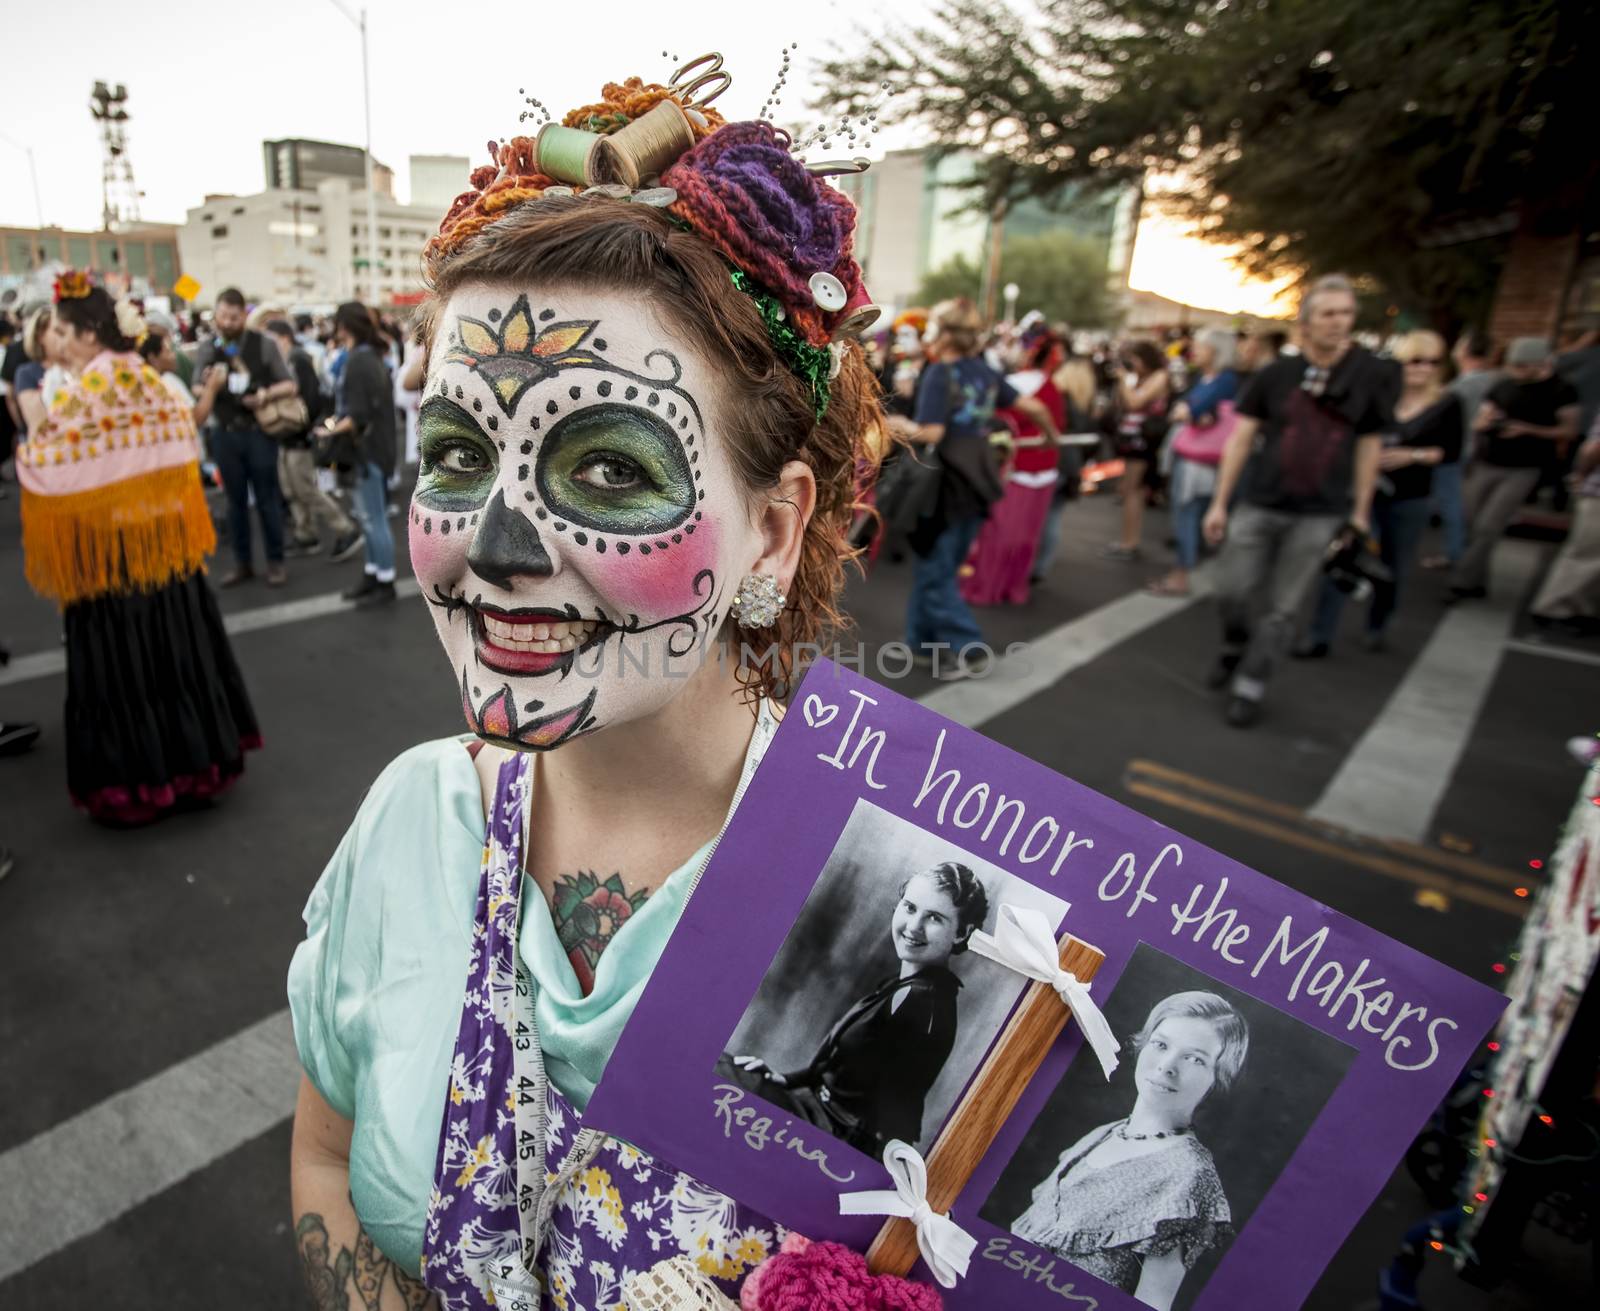 TUCSON, AZ/USA - NOVEMBER 09: Unidentified woman with memorial sign in facepaint at the All Souls Procession on November 09, 2014 in Tucson, AZ, USA.